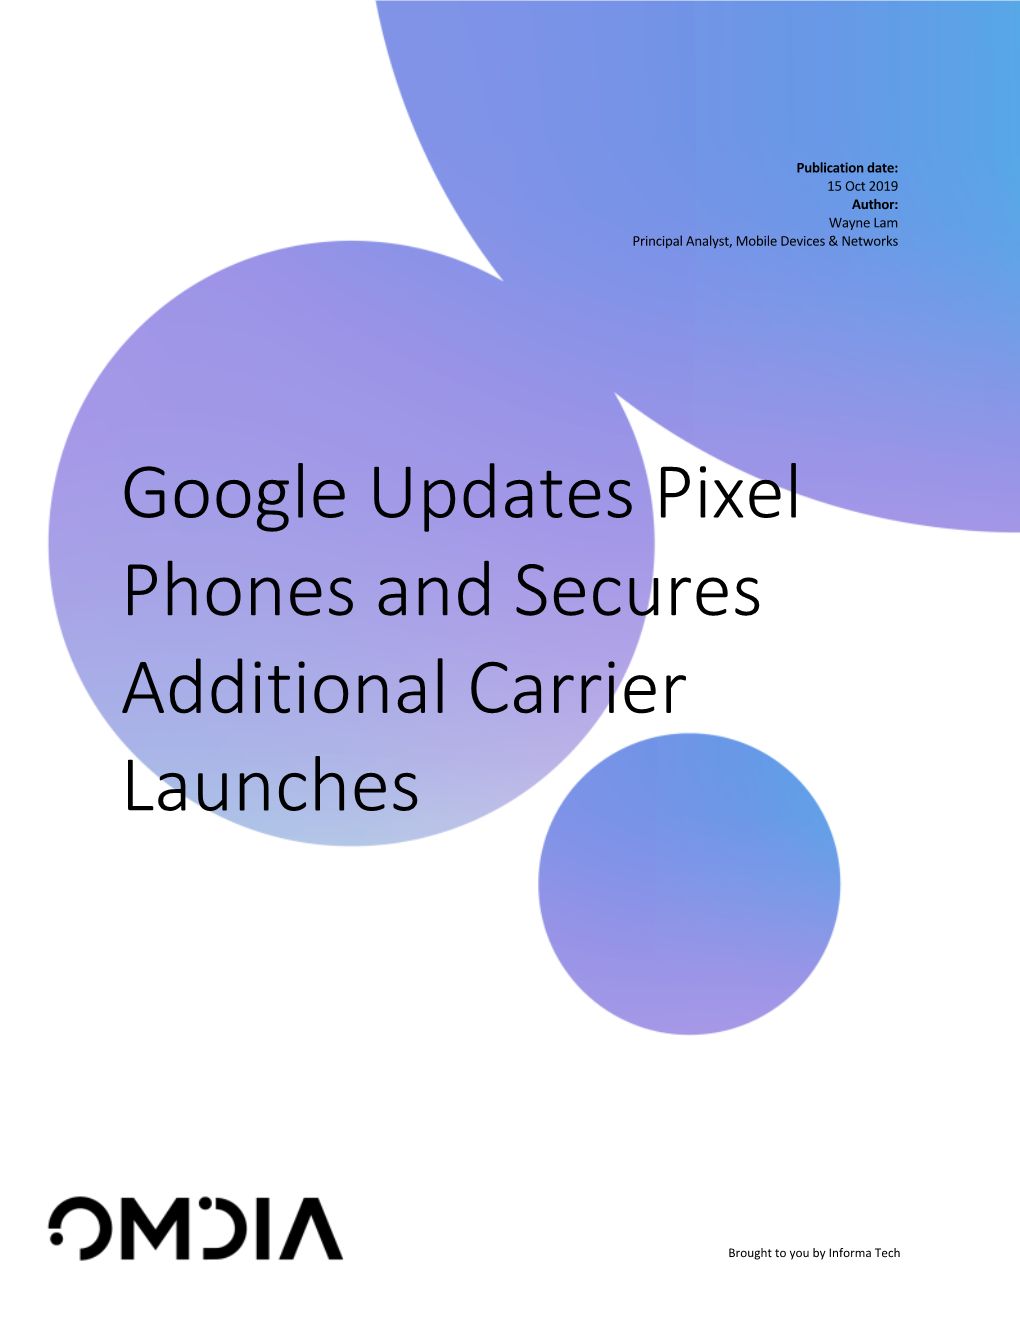 Google Updates Pixel Phones and Secures Additional Carrier Launches